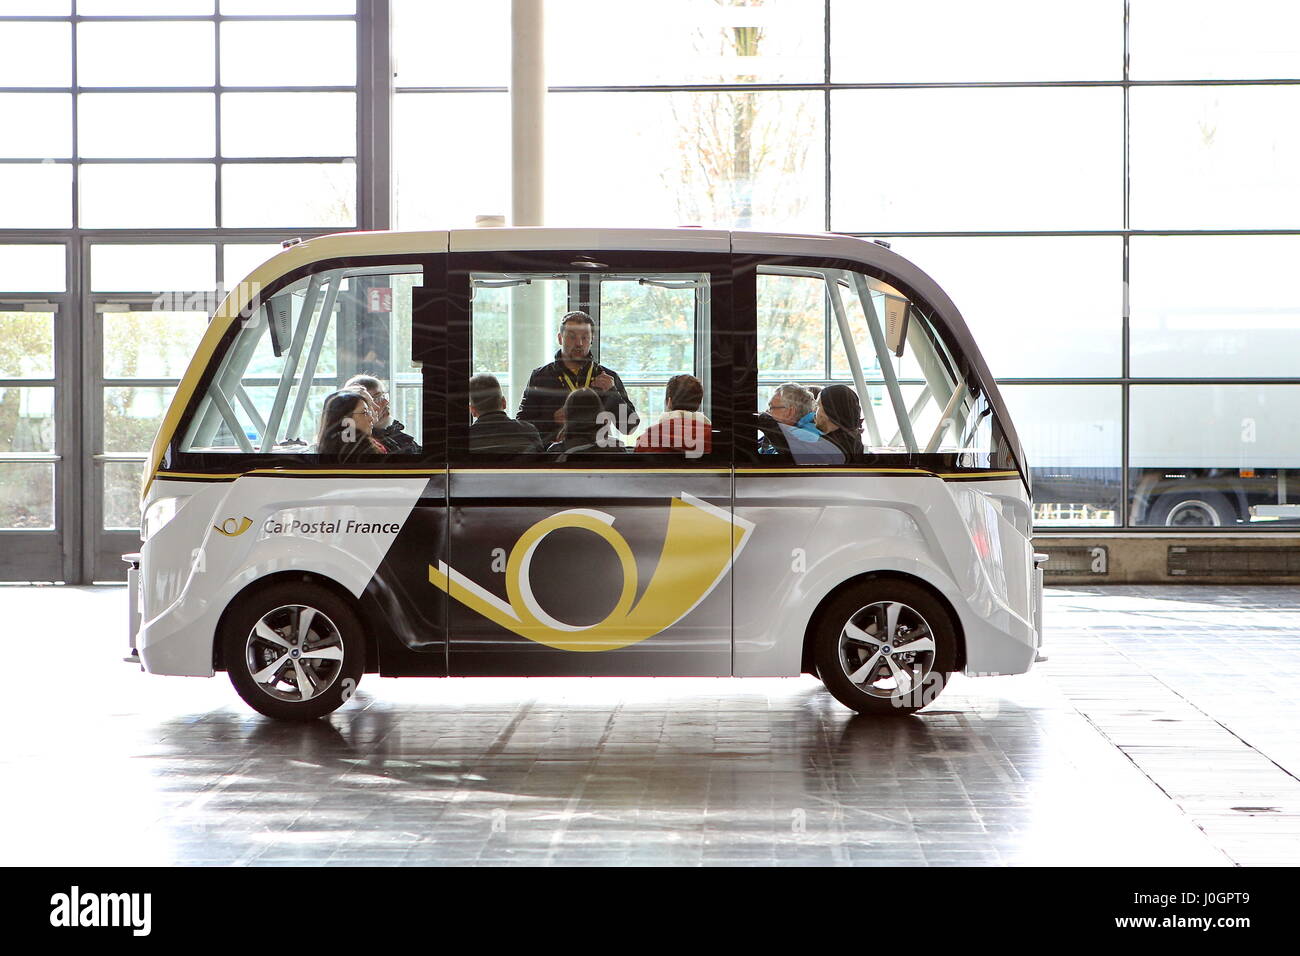 Hanover, Germany. 21th March, 2017. self-driving electric minibus by PostAuto Switzerland (here its french subsidiary CarPostal France) invides fair visitors for a test drive with this 'SmartShuttle' through fair hall 13. This autonomous bus (Model name: Arma) is manufactured by Navya SAS (France), is considered first autonomous series vehicle for local trafiic, in usage since 2016 (e.g. Switzerland, France), max. 15 persons, max. speed 45 km/h. CeBIT 2017, ICT trade fair, lead theme 'd!conomy - no limits'. Photocredit: Christian Lademann Stock Photo